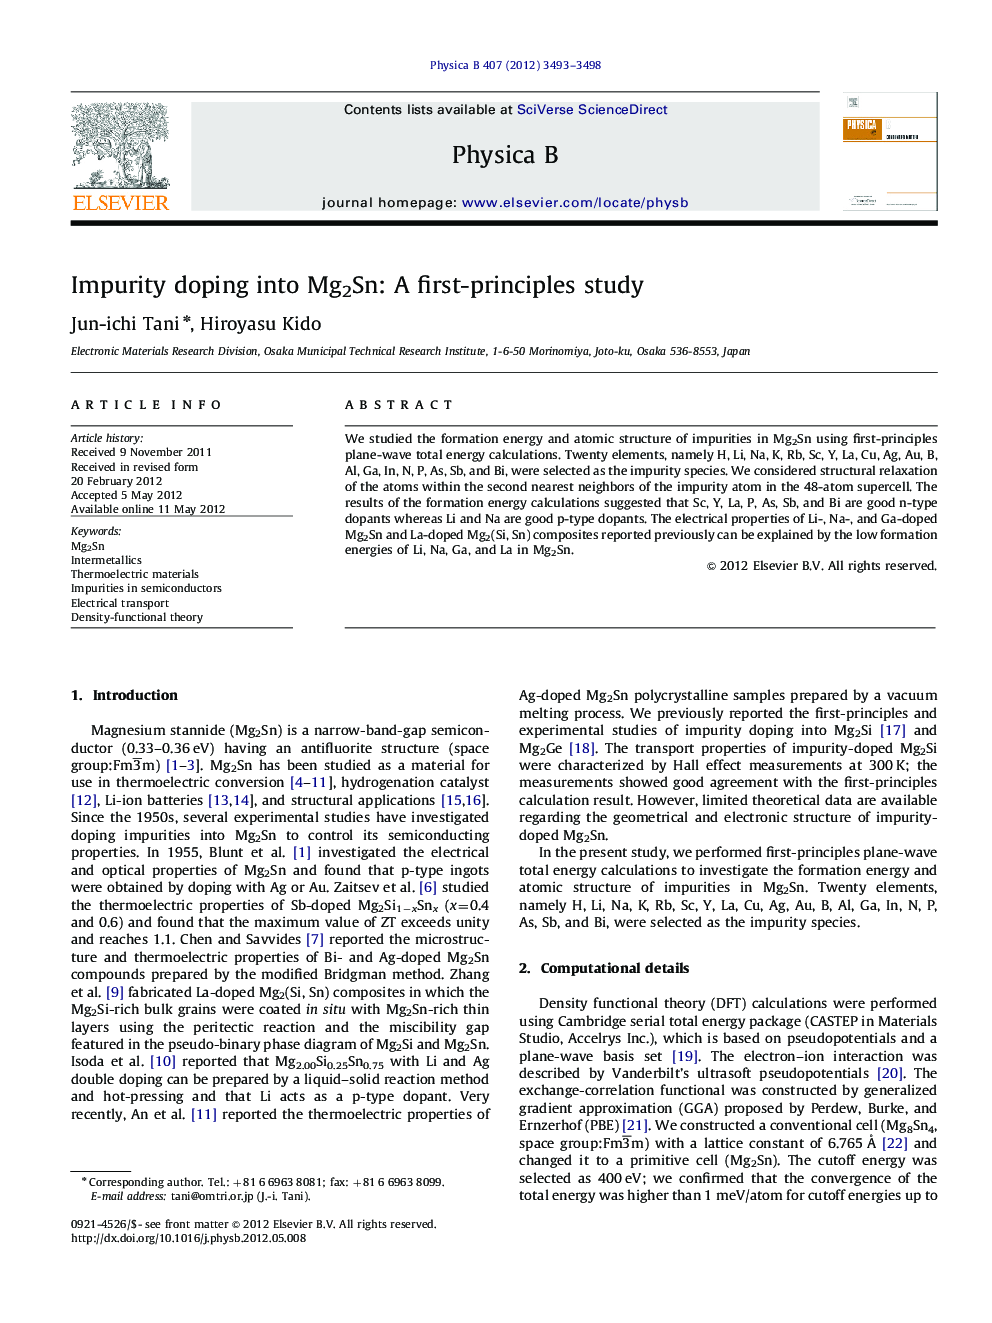 Impurity doping into Mg2Sn: A first-principles study